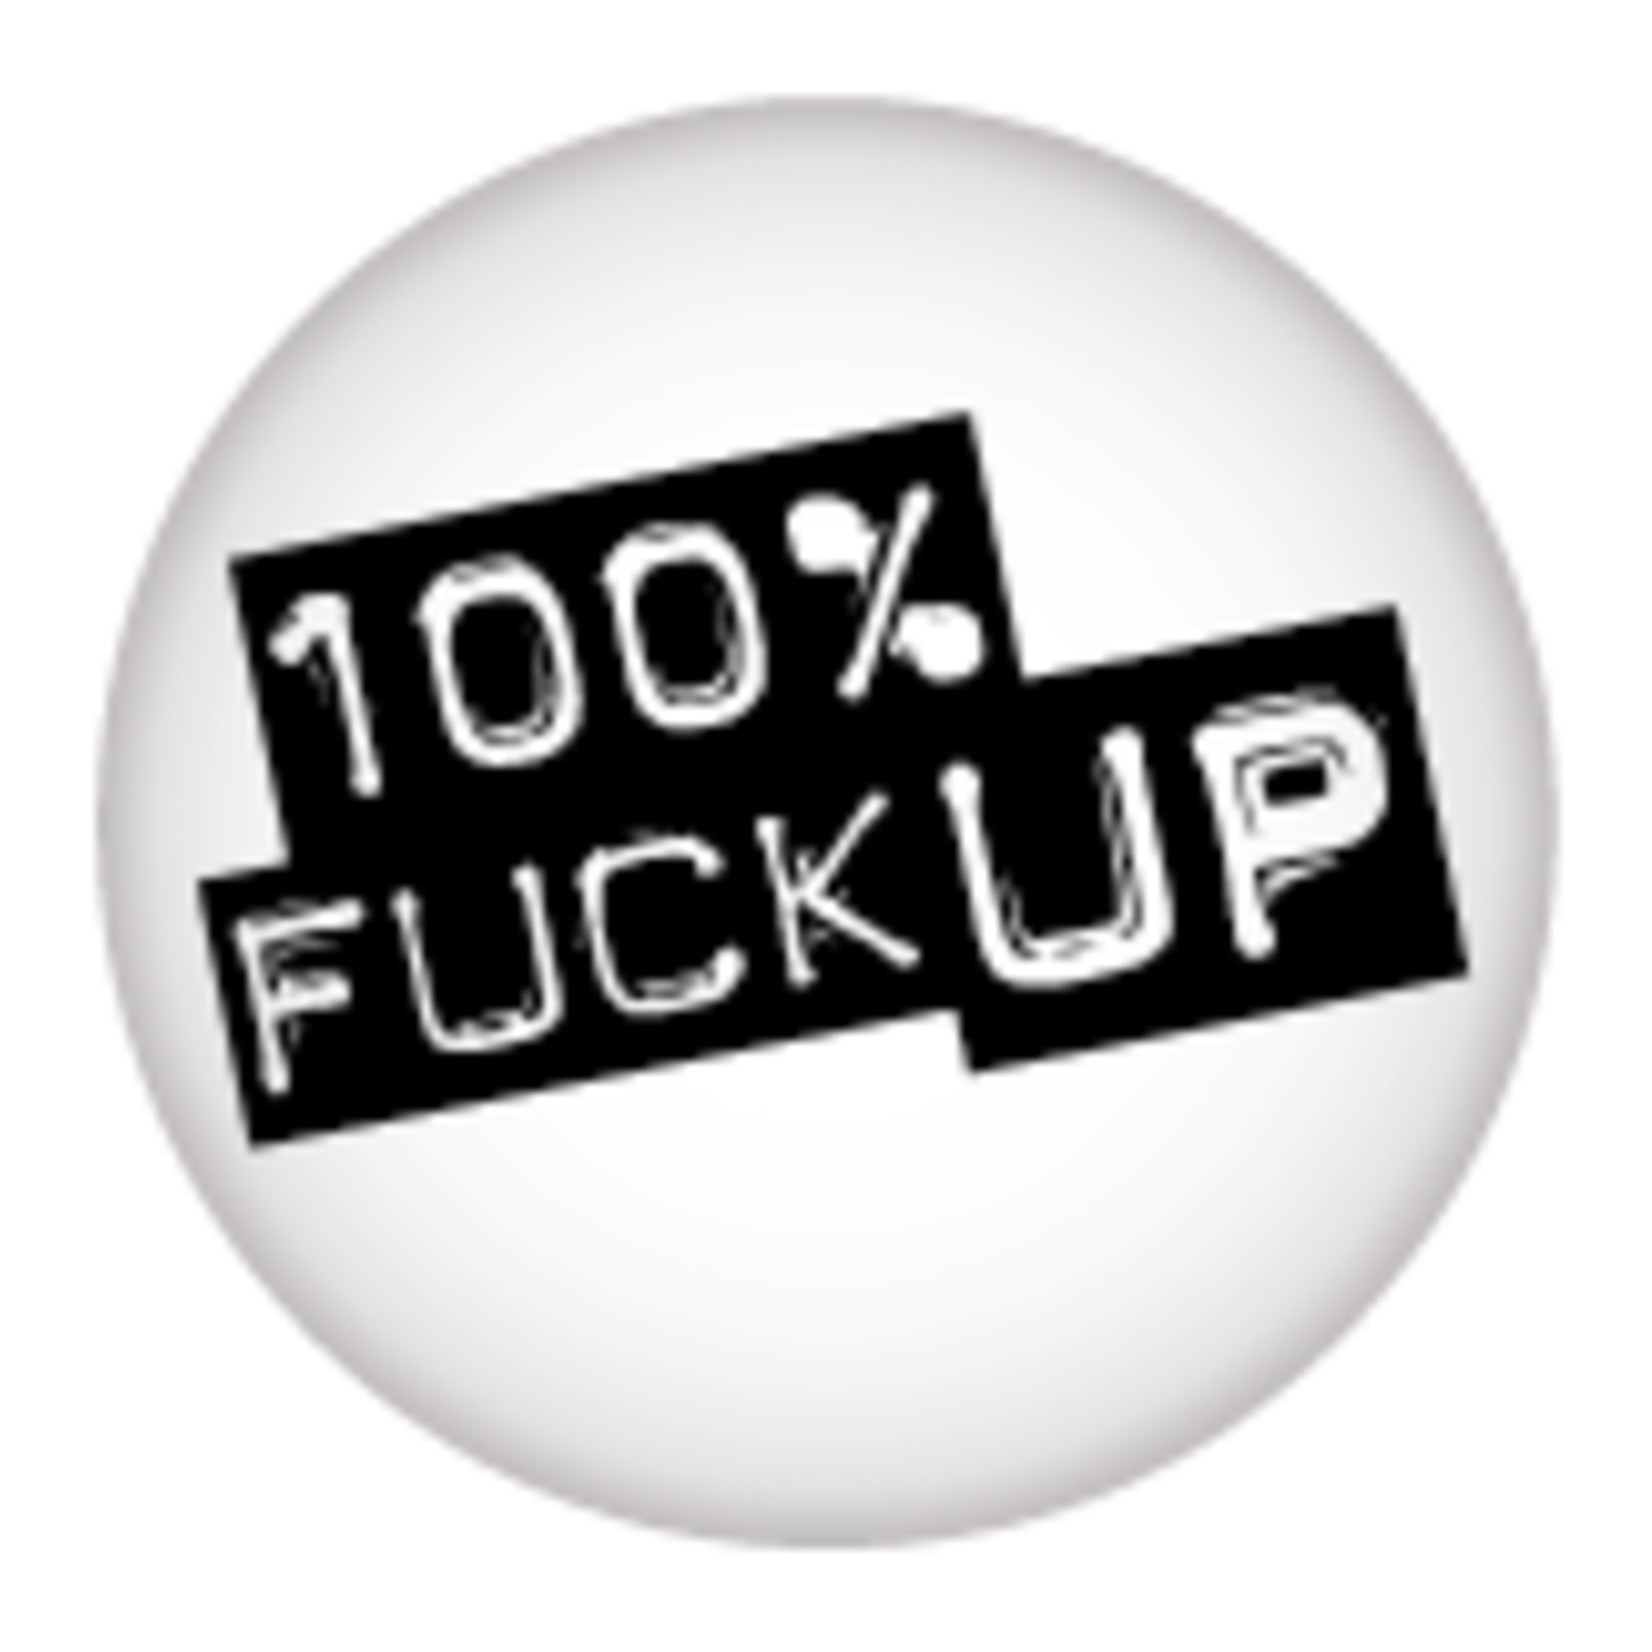 Button - 100% Fuck Up